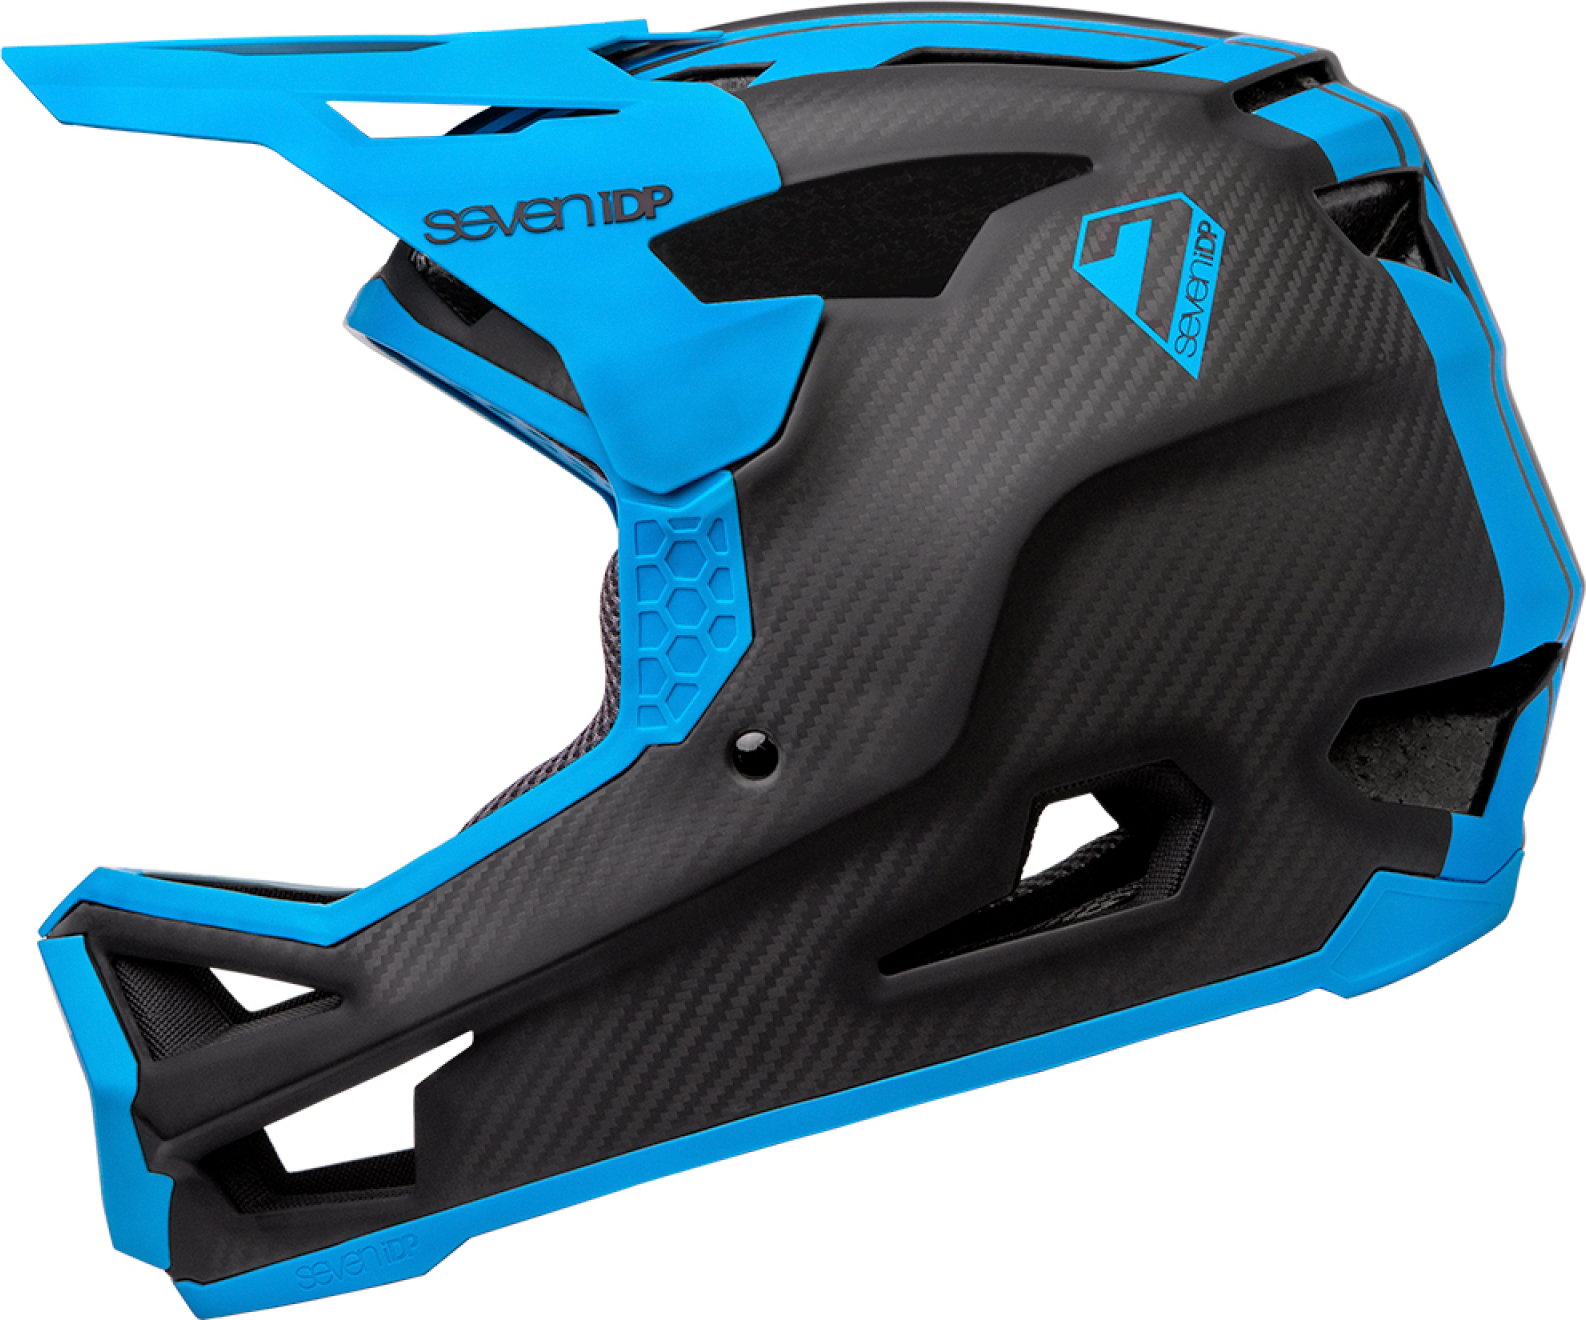 Seven Protection (7iDP) Project 23 Carbon Fullface Helmet | The Cyclery